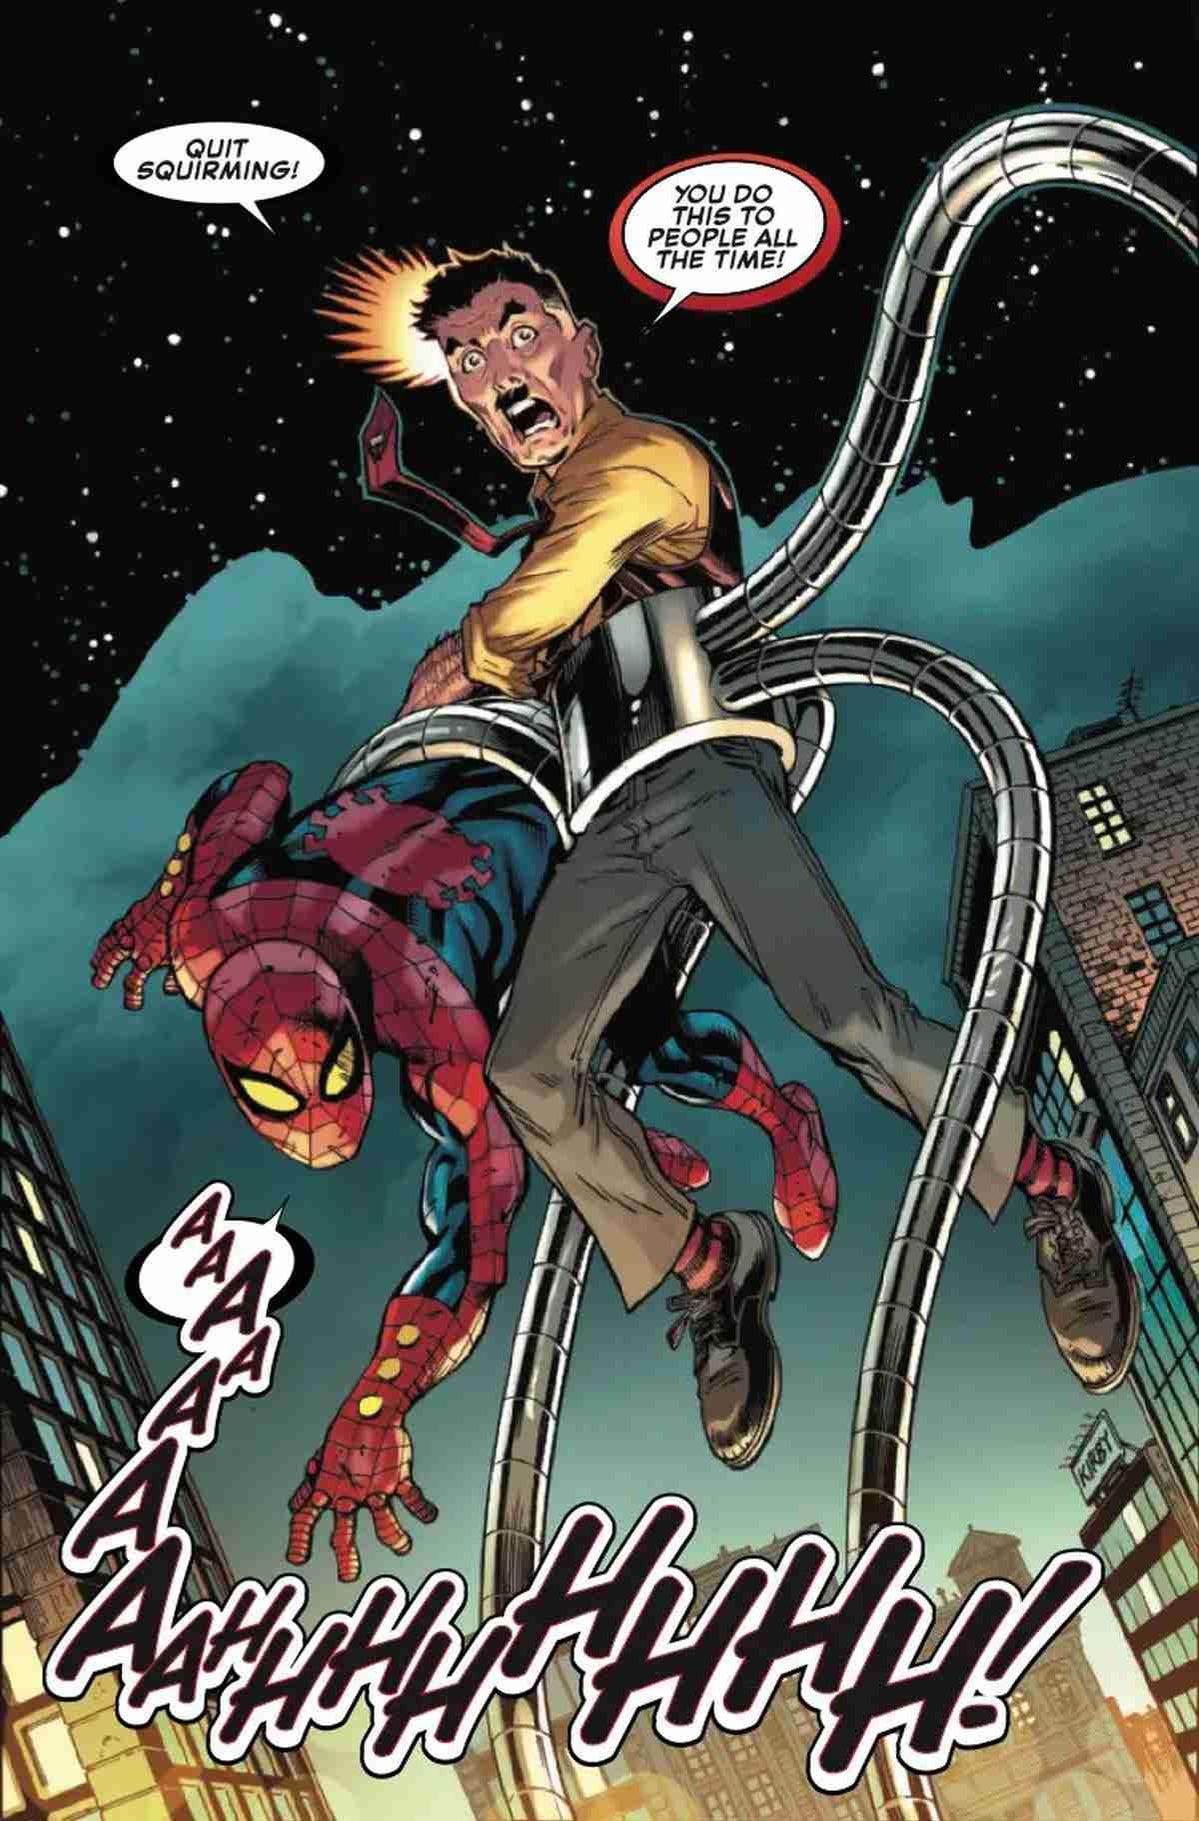 EXCLUSIVE Marvel Preview: The Amazing Spider-Man #30